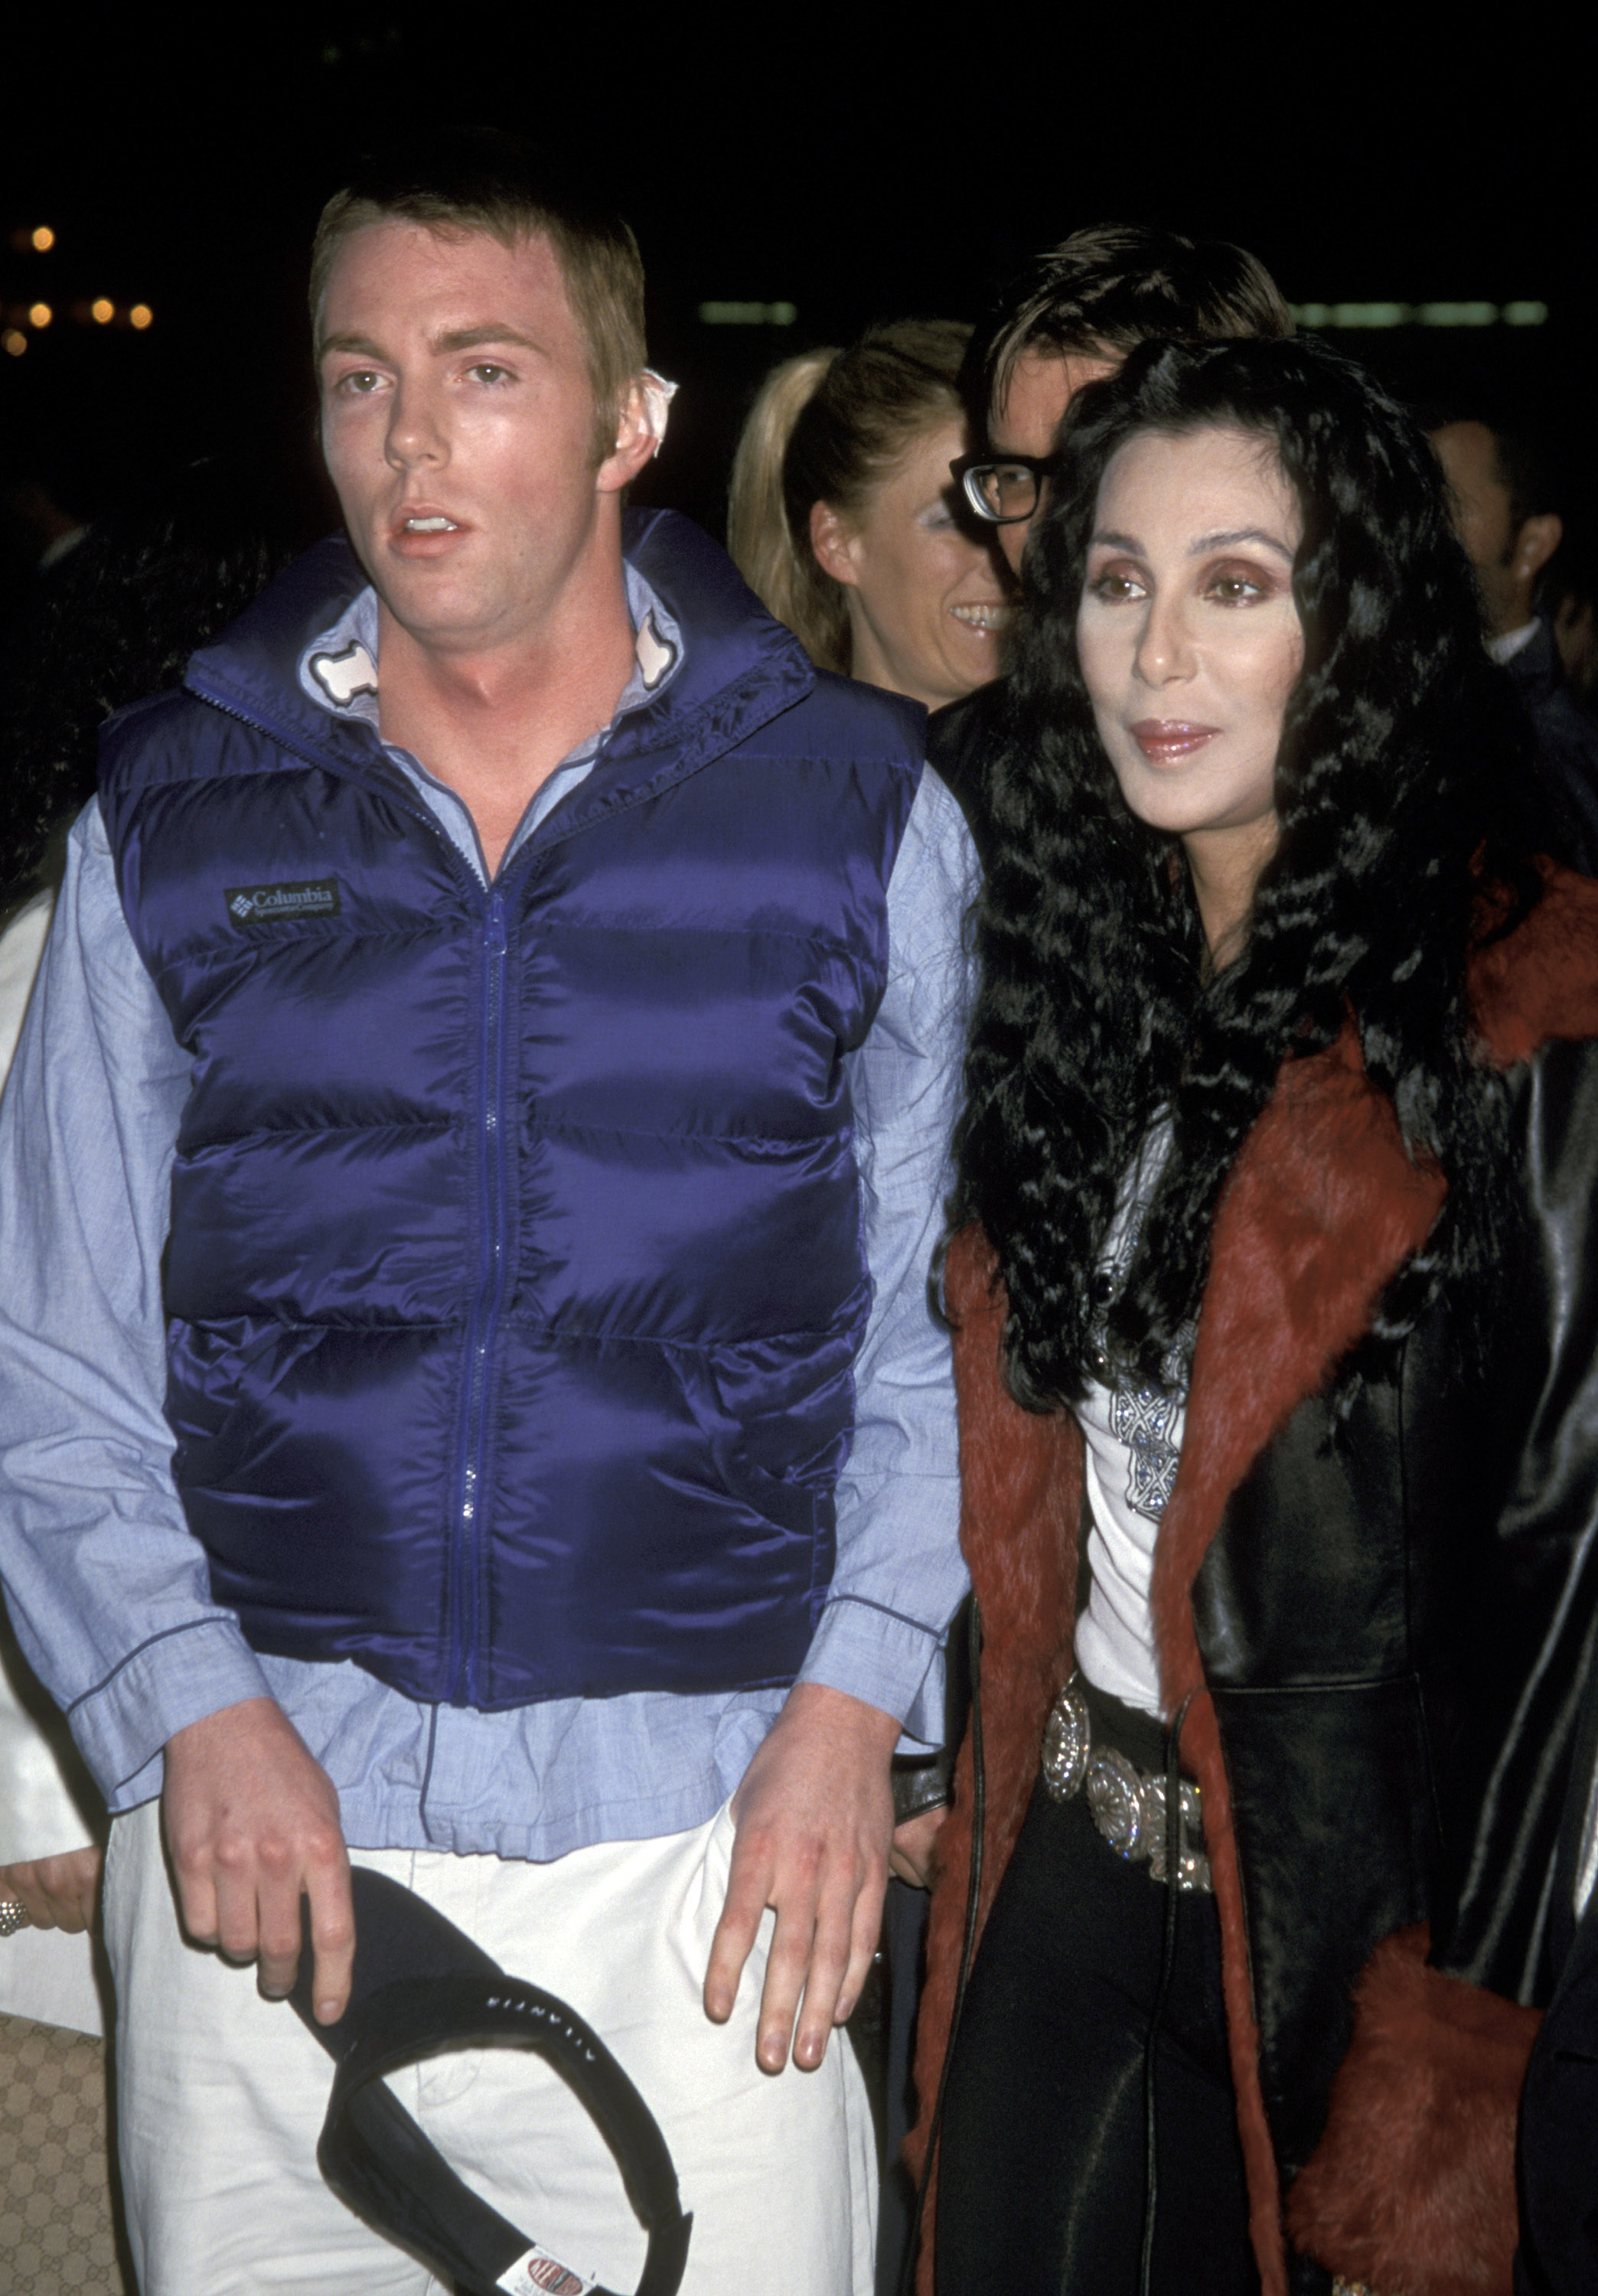 Elijah Blue Allman and Cher at the Los Angeles premiere of "Blow" on March 21, 2001 | Source: Getty Images